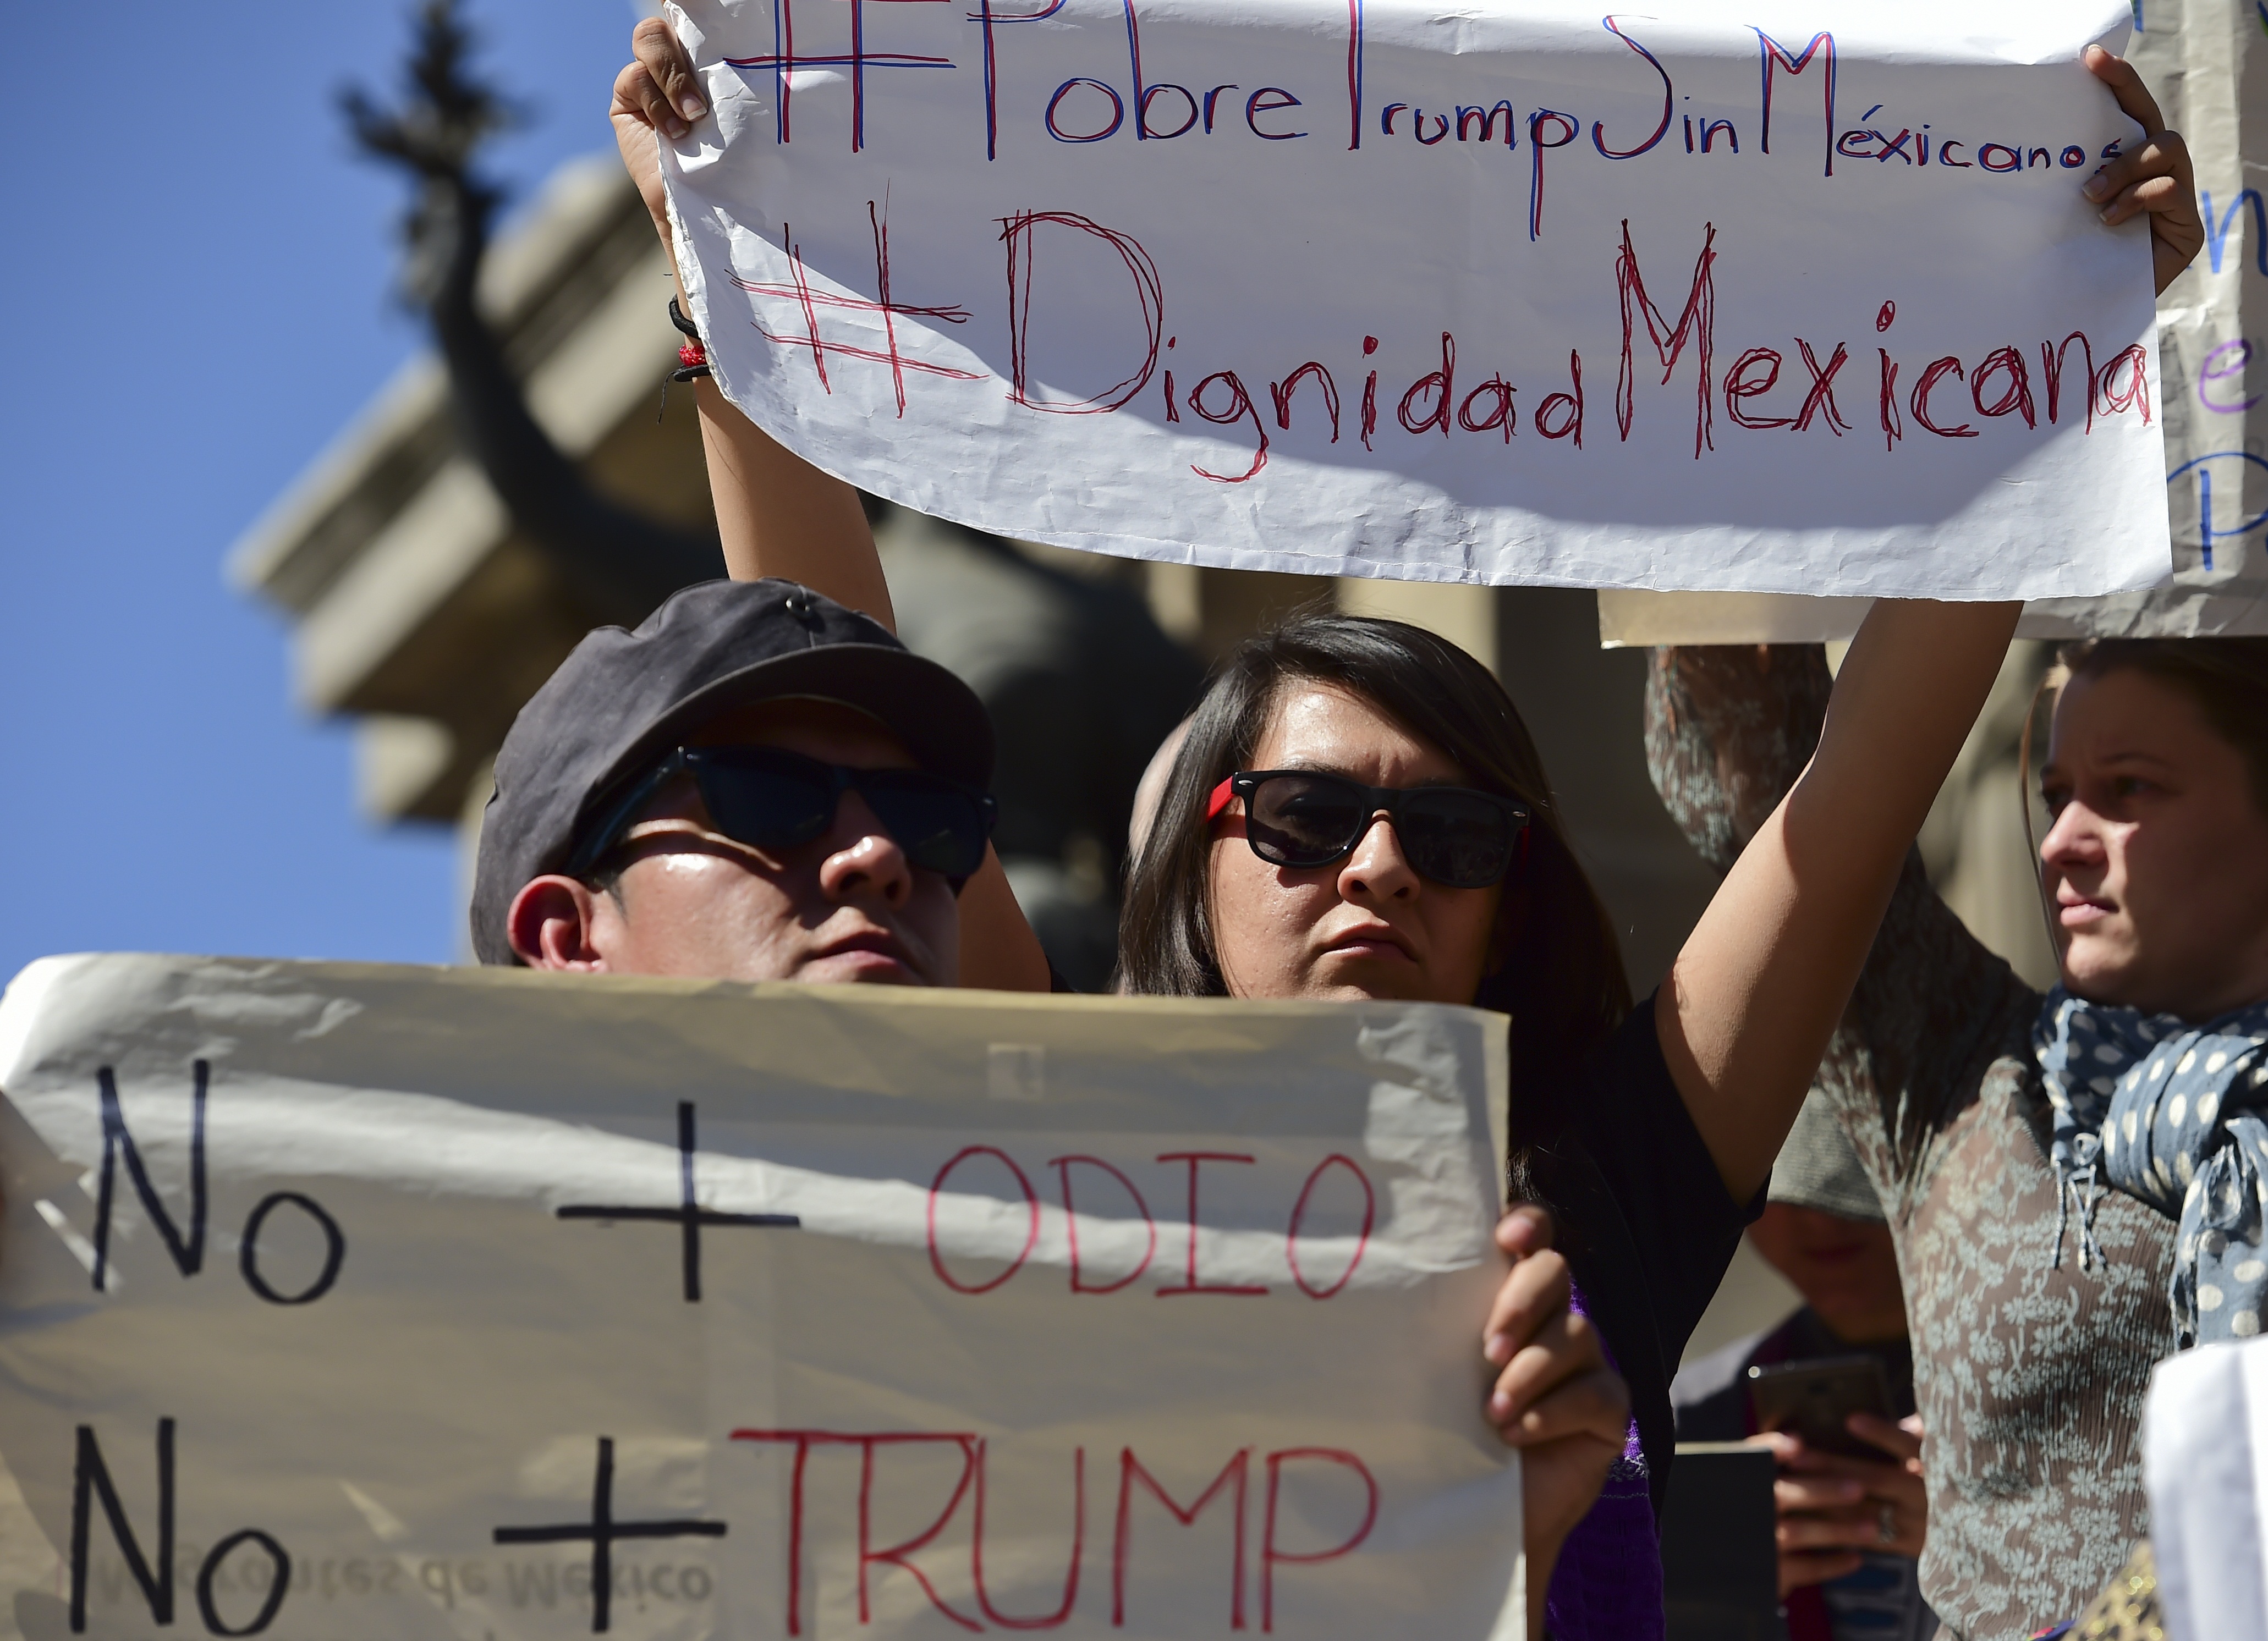 People protest against the new US President Donald Trump, in Mexico City during his inauguration day on January 20, 2017. / AFP PHOTO / RONALDO SCHEMIDT